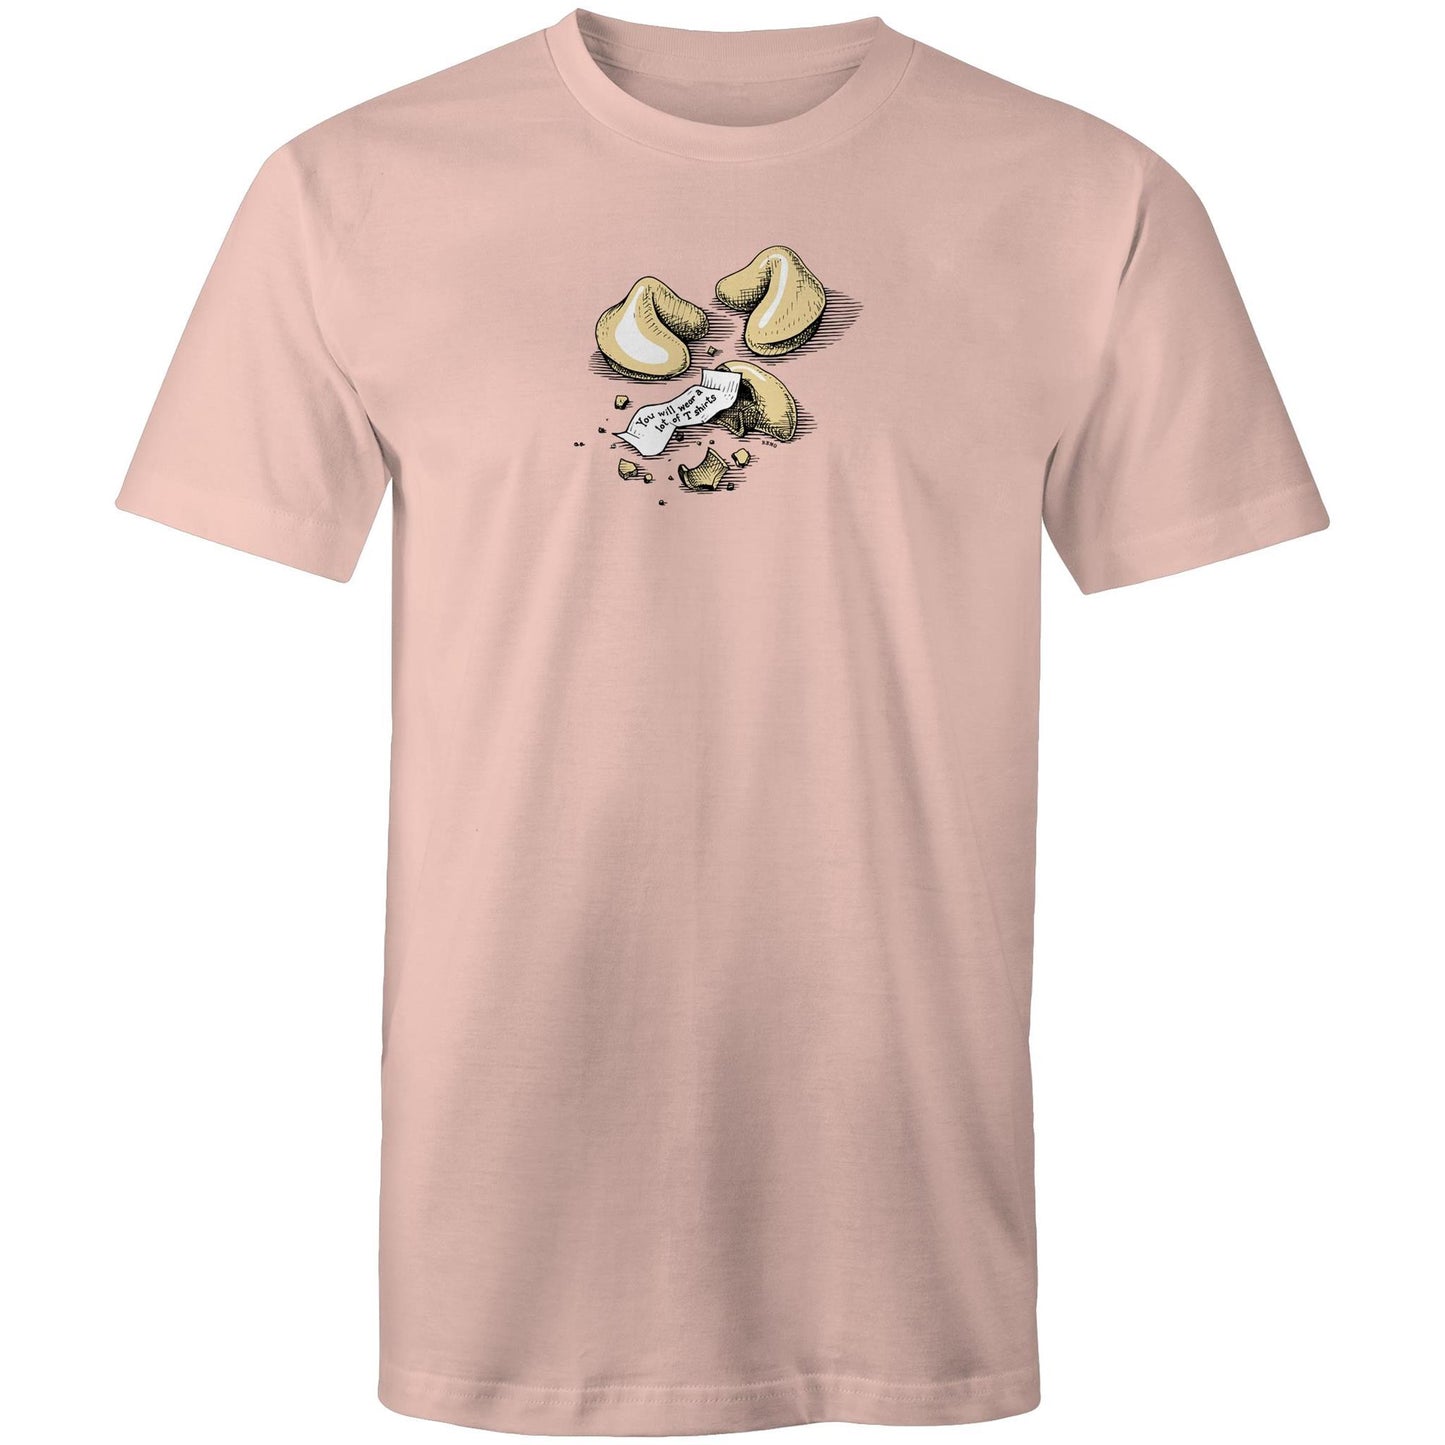 Fortune Cookies T Shirts for Men (Unisex)